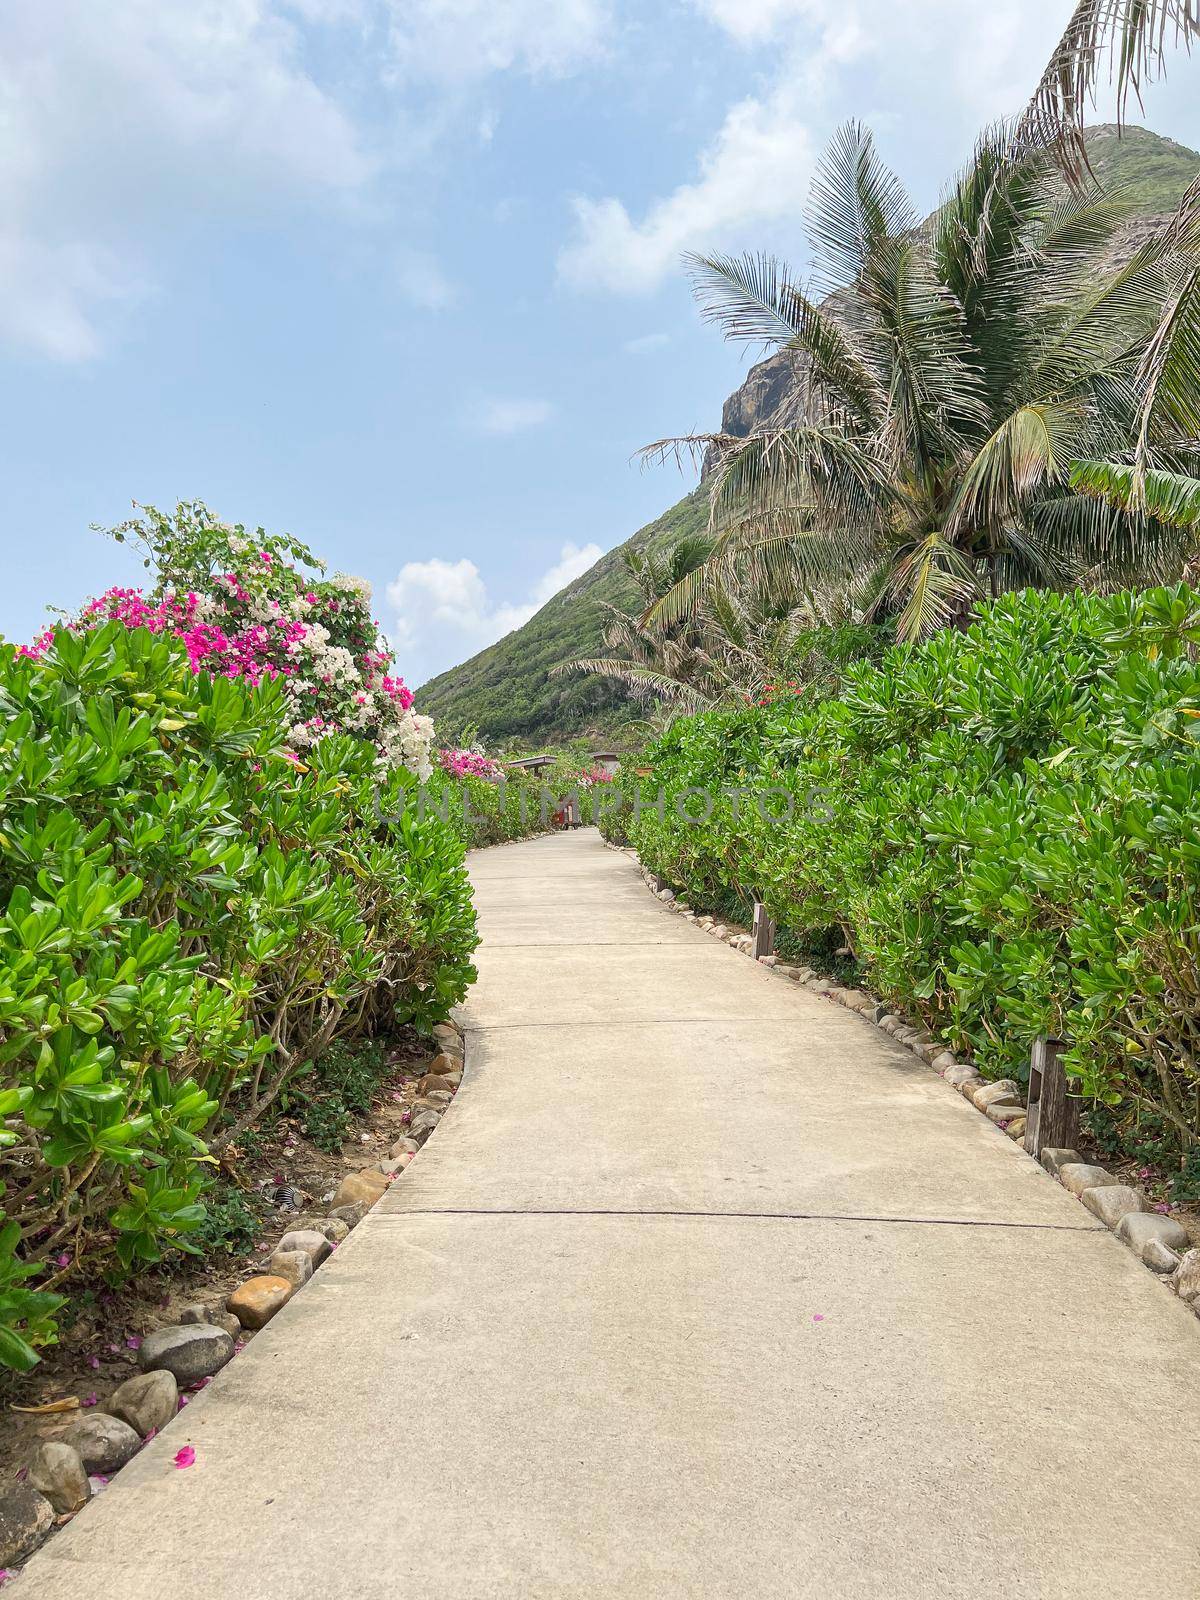 Cement trails with green spaces in the resort